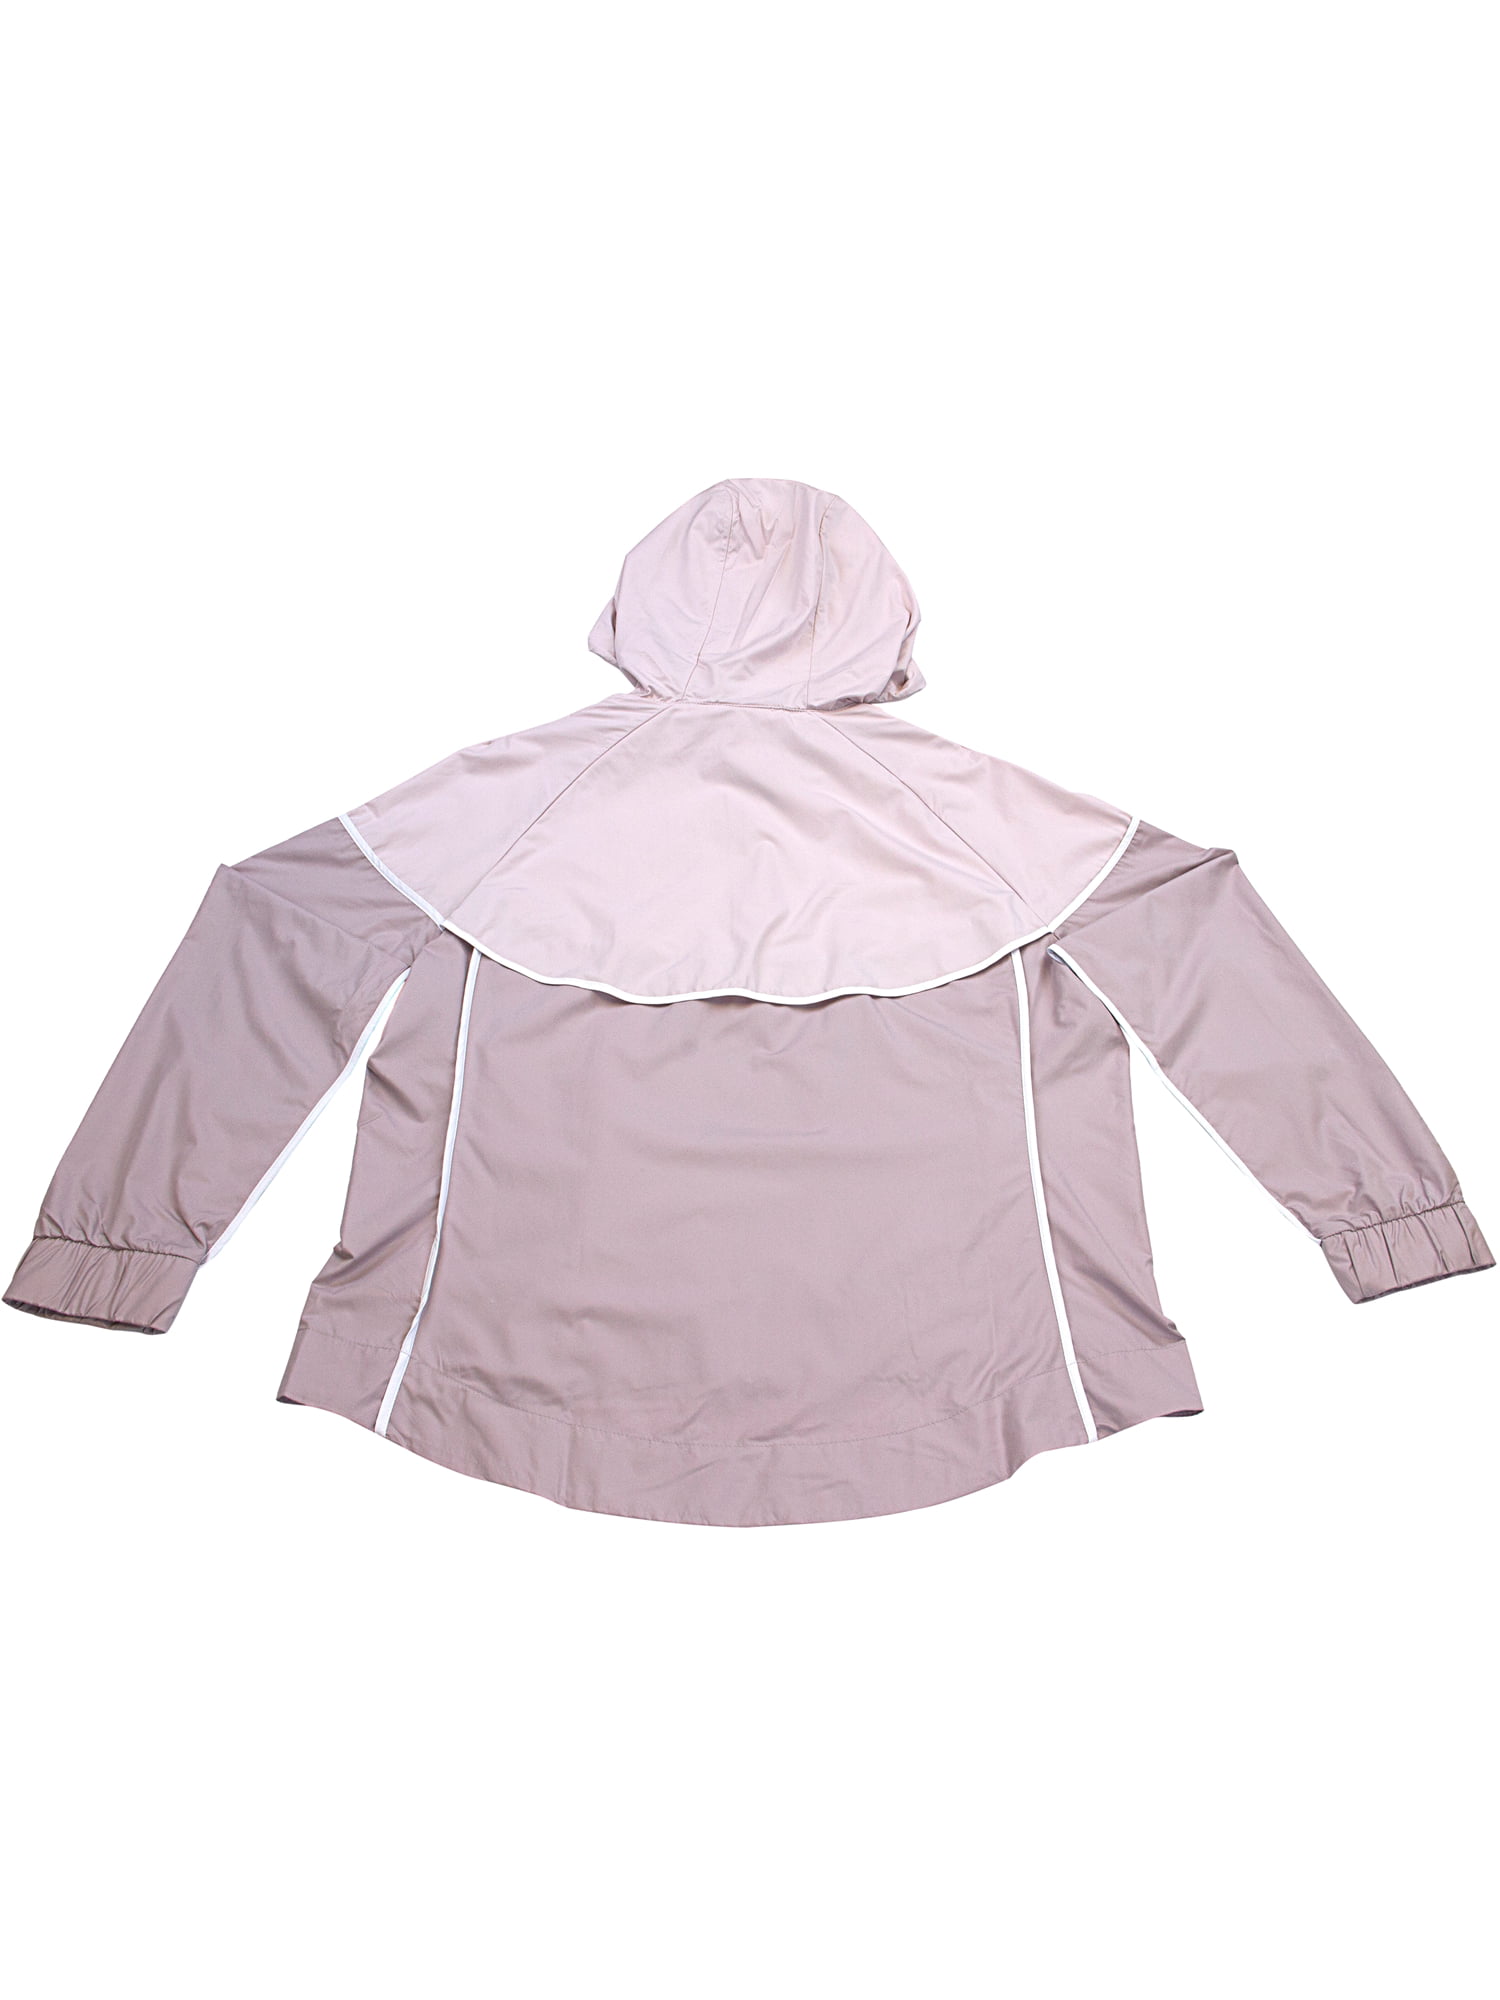 nike windrunner particle rose